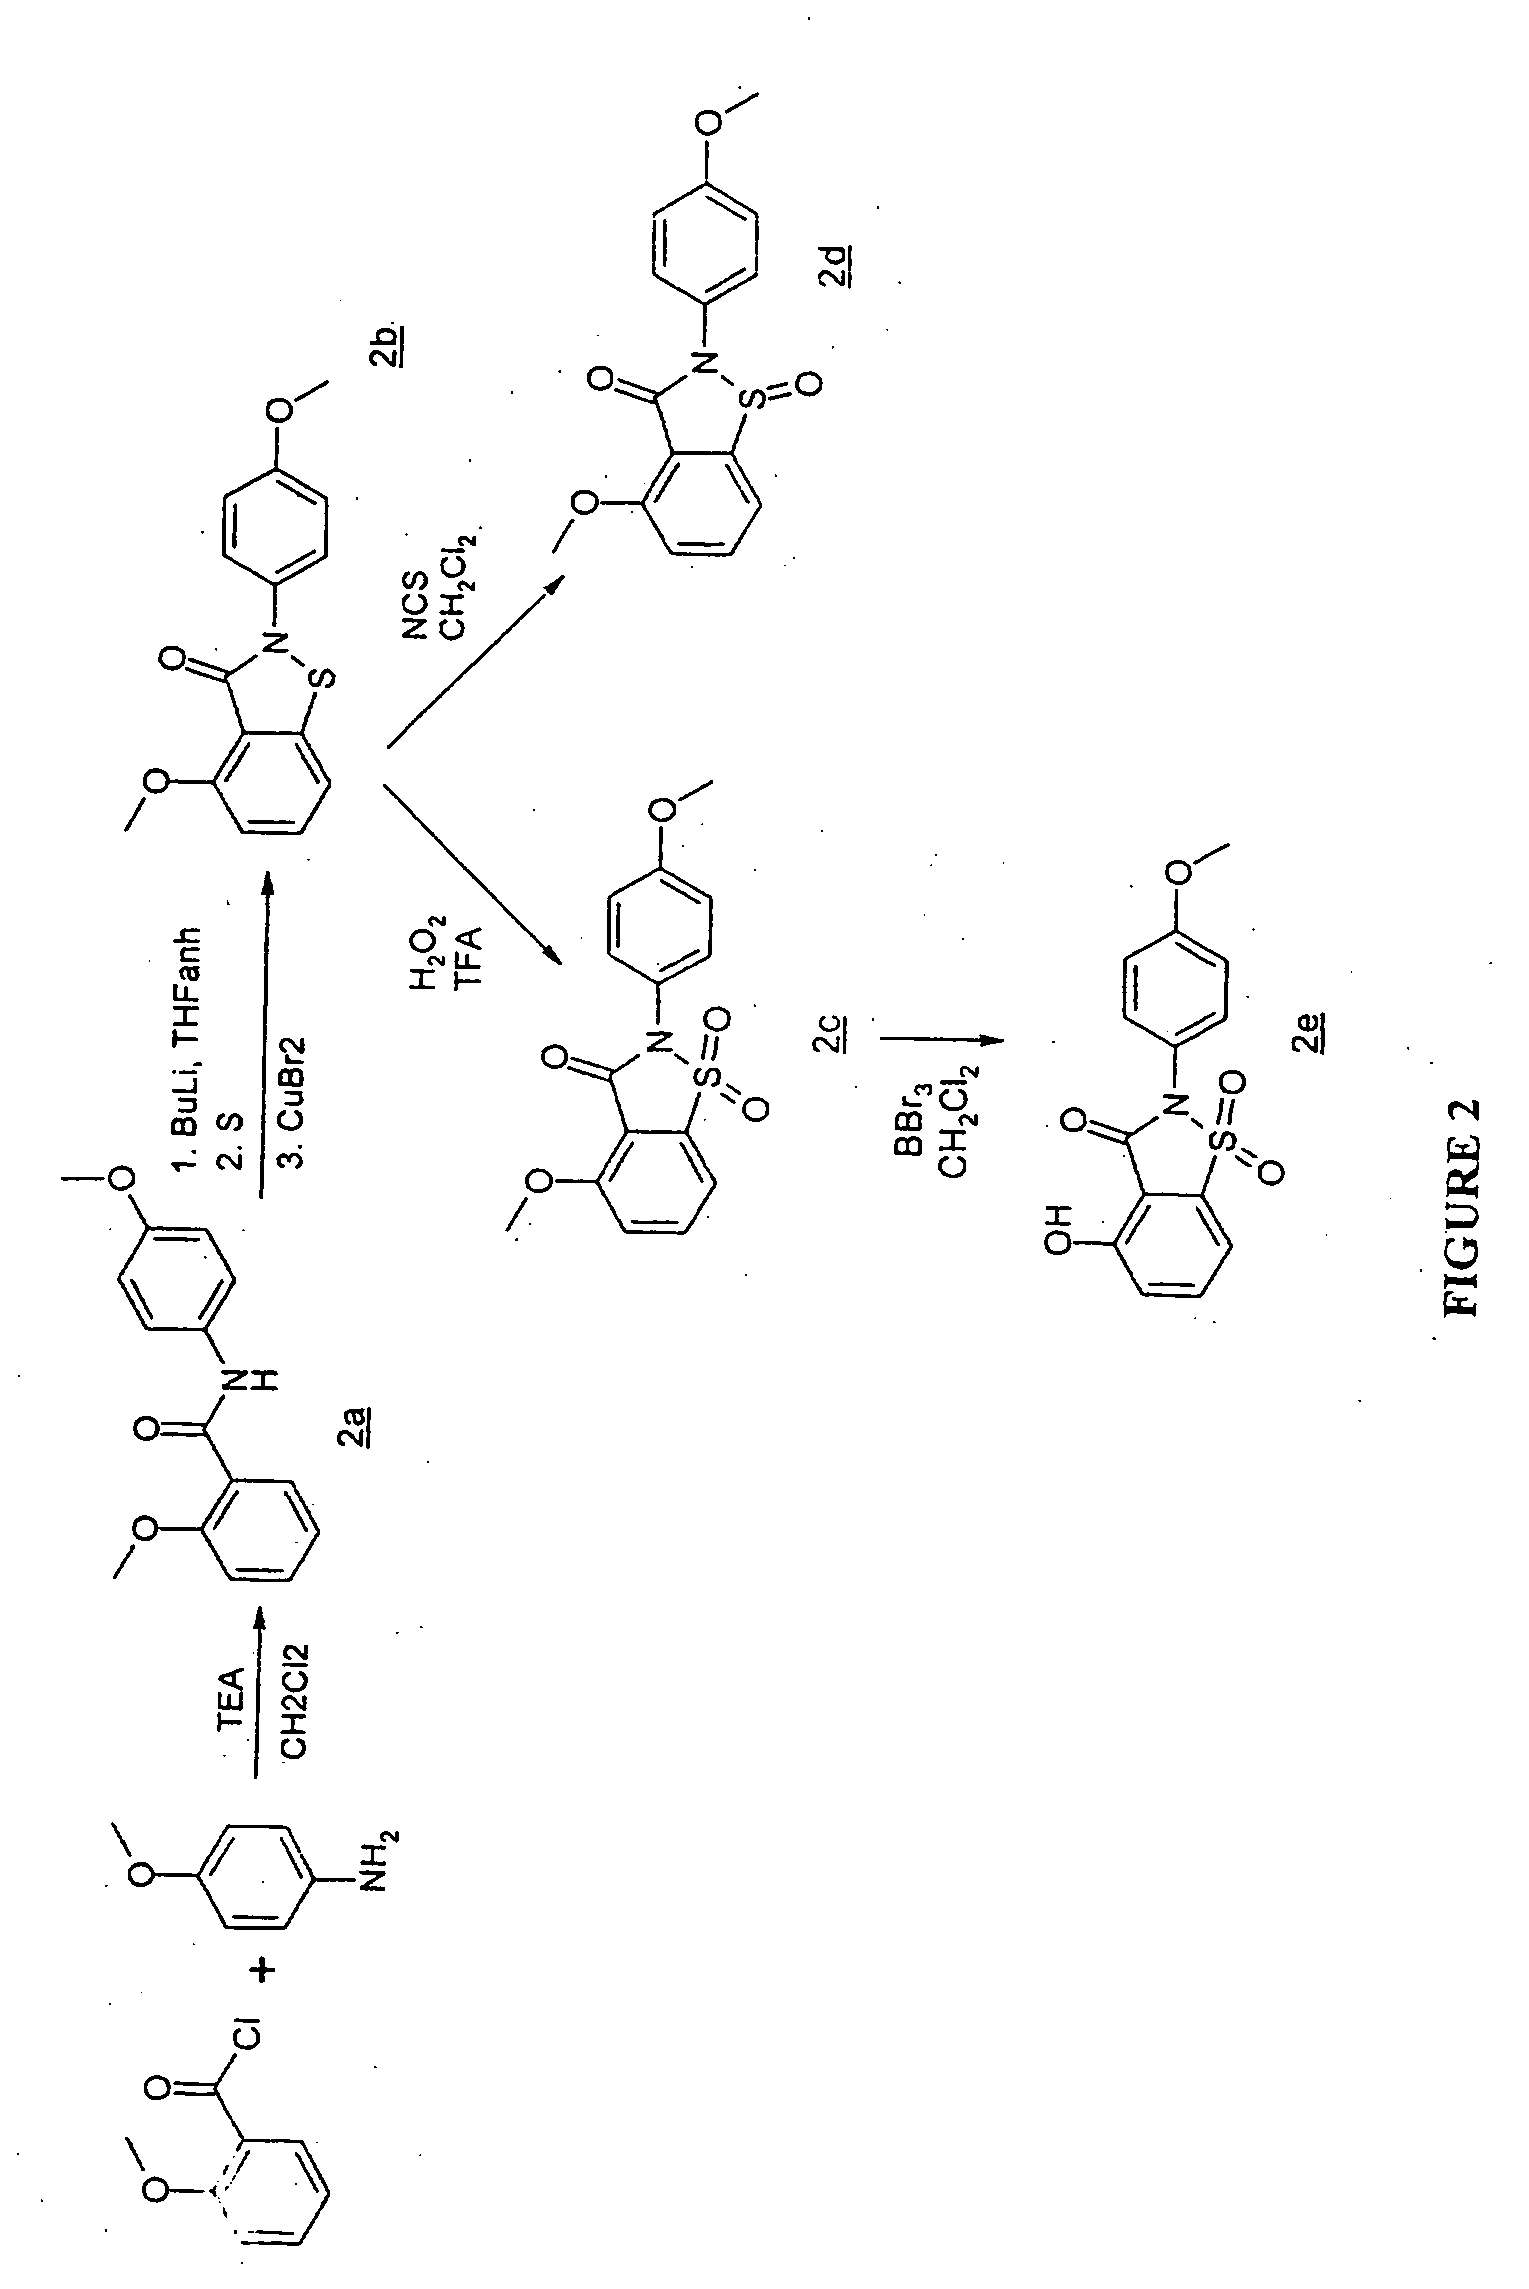 Benzoisothiazolone compositions